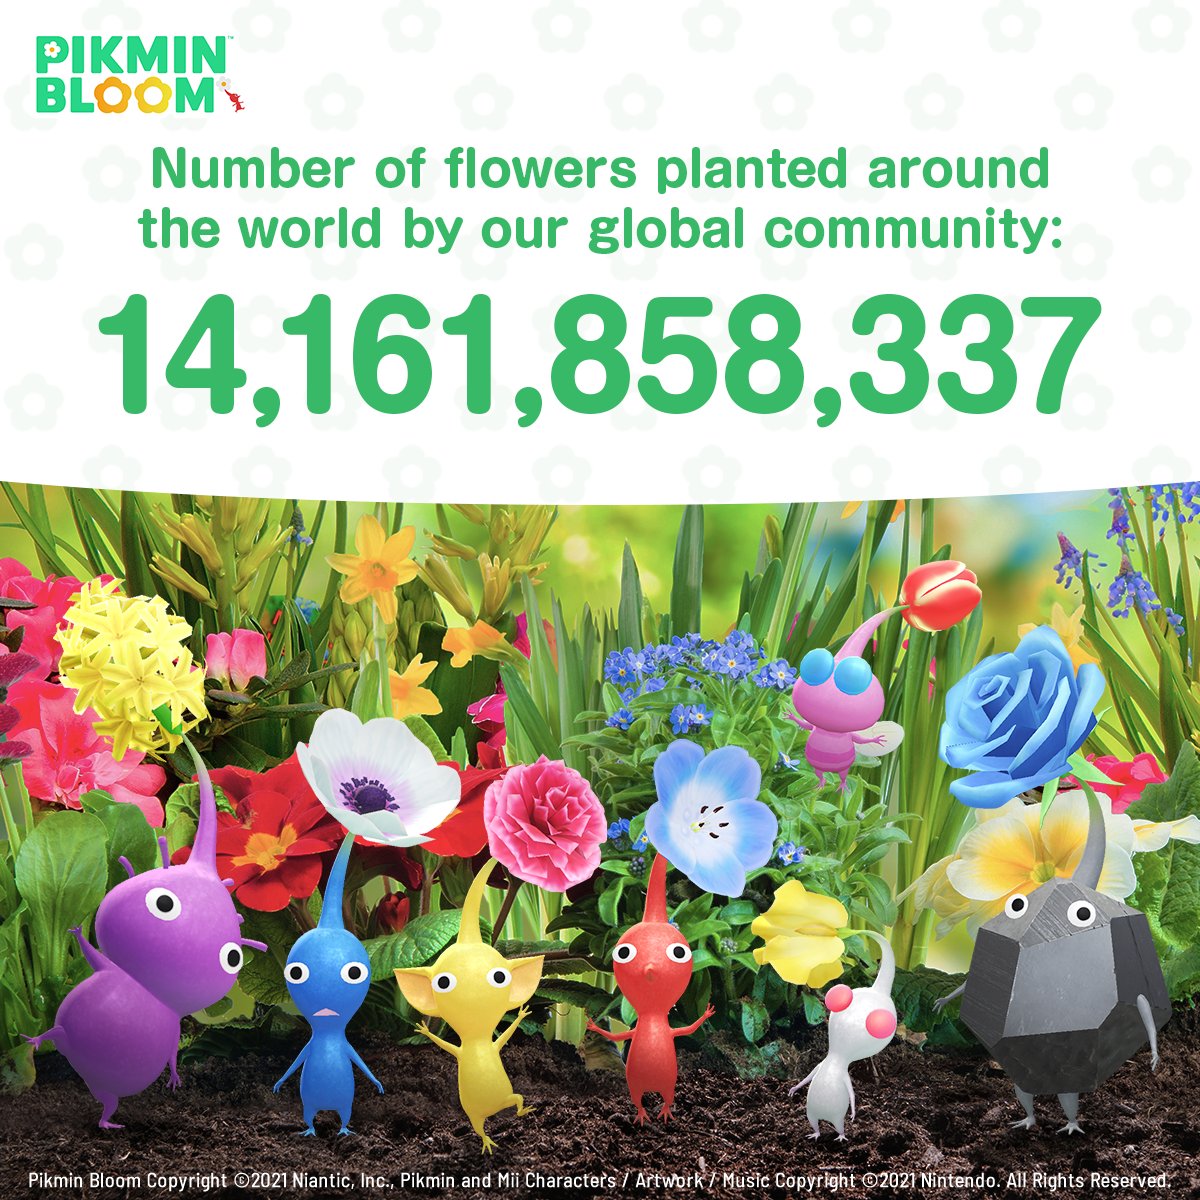 Earth Day Final Update 🌎🌱

The total number of flowers planted collectively by our global community during the event was 14,161,858,337!✨

We couldn’t have gotten here without you, and we hope that this global activity has helped bring our community together!

#EarthDay_PB